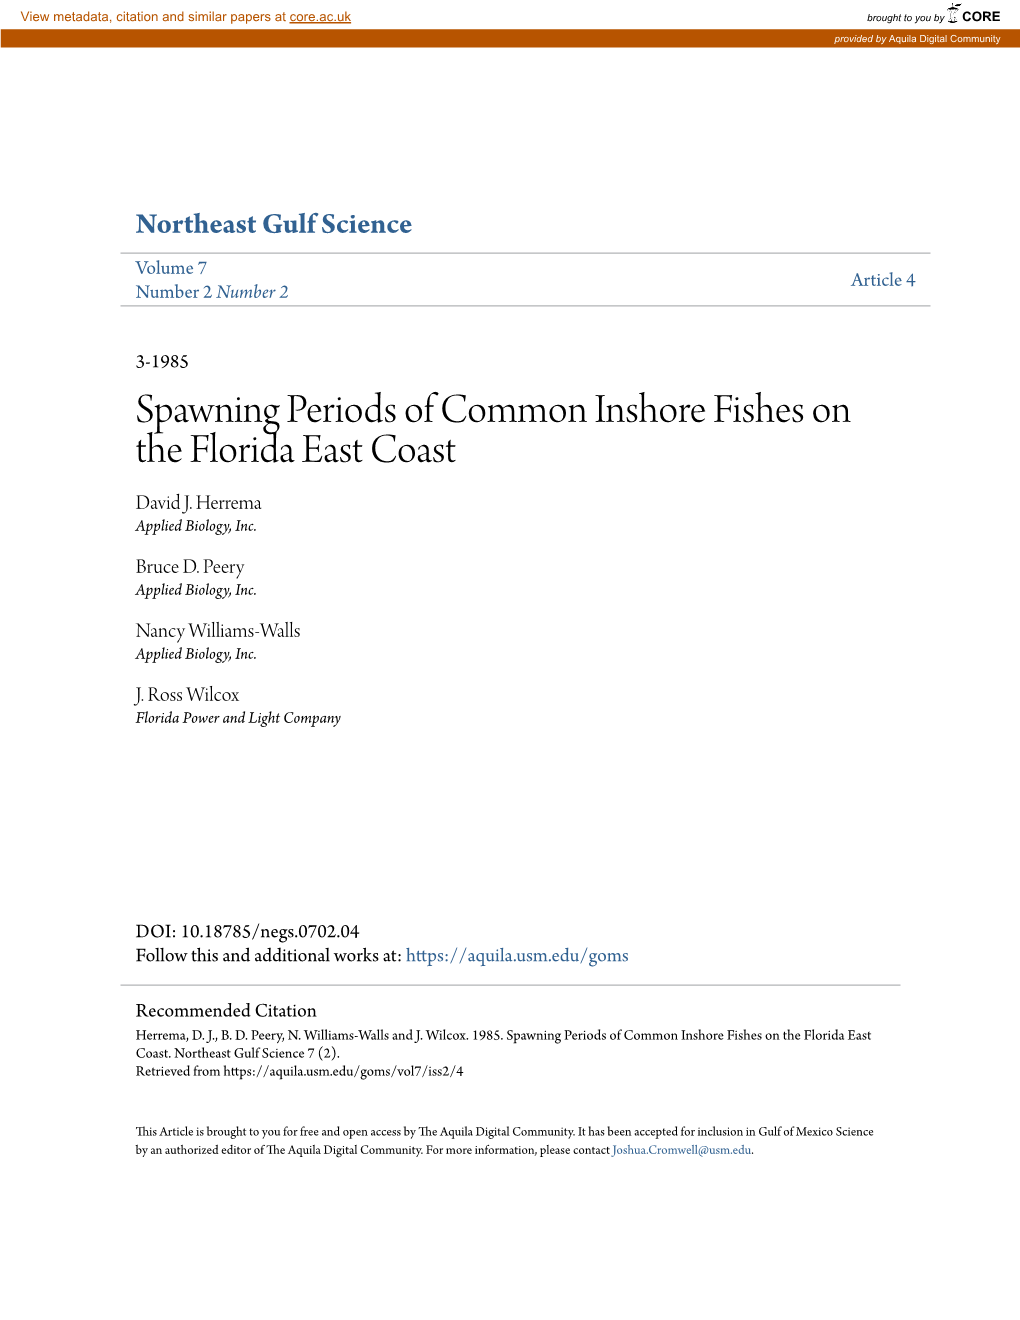 Spawning Periods of Common Inshore Fishes on the Florida East Coast David J